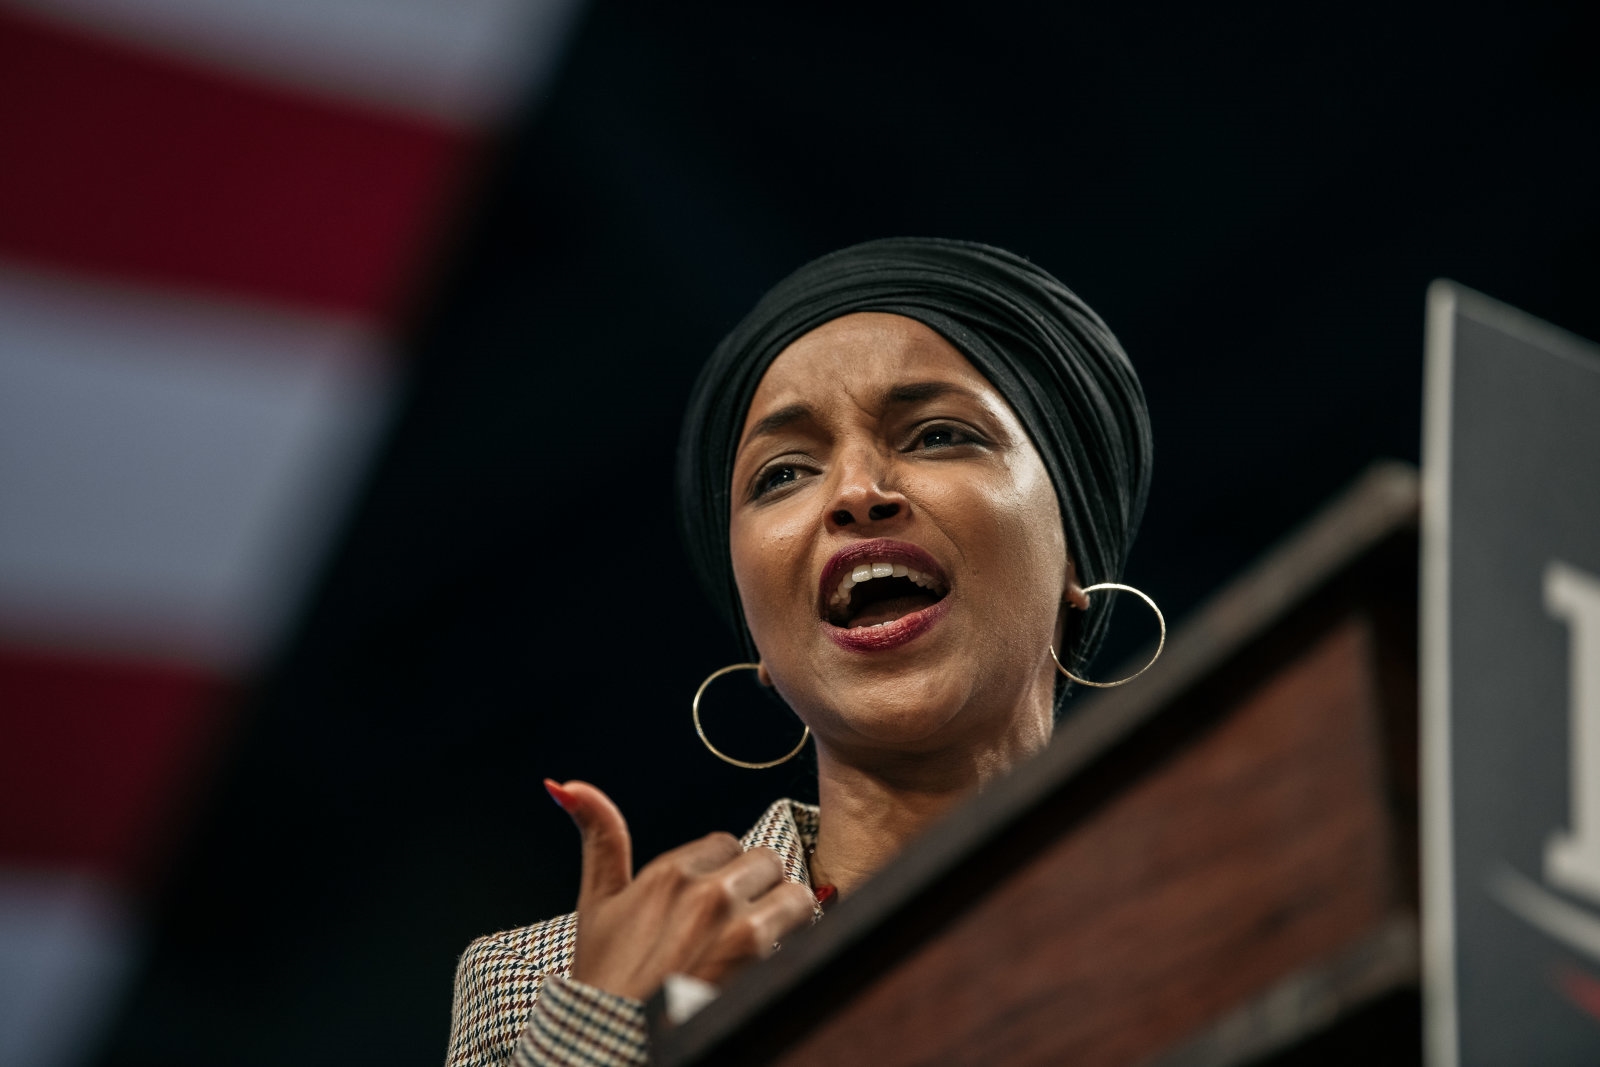 Twitter bans House candidate who suggested Ilhan Omar should be hanged | DeviceDaily.com